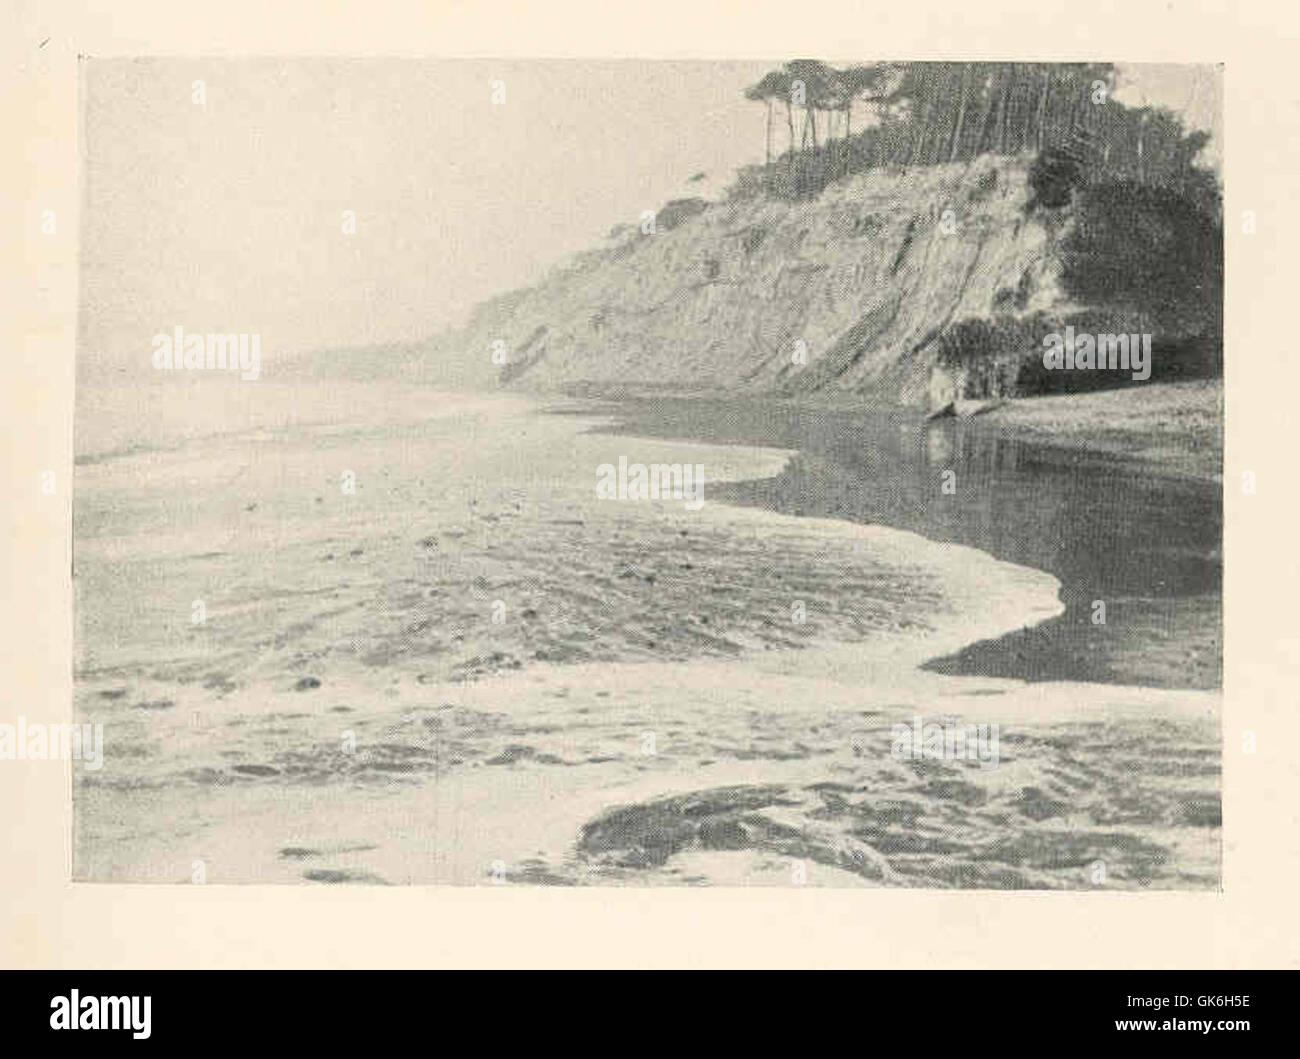 37984 Shingle Sorted From Sand by the Wash of a Heavy Swell (Branksome Chine, Near Bournemouth) Stock Photo